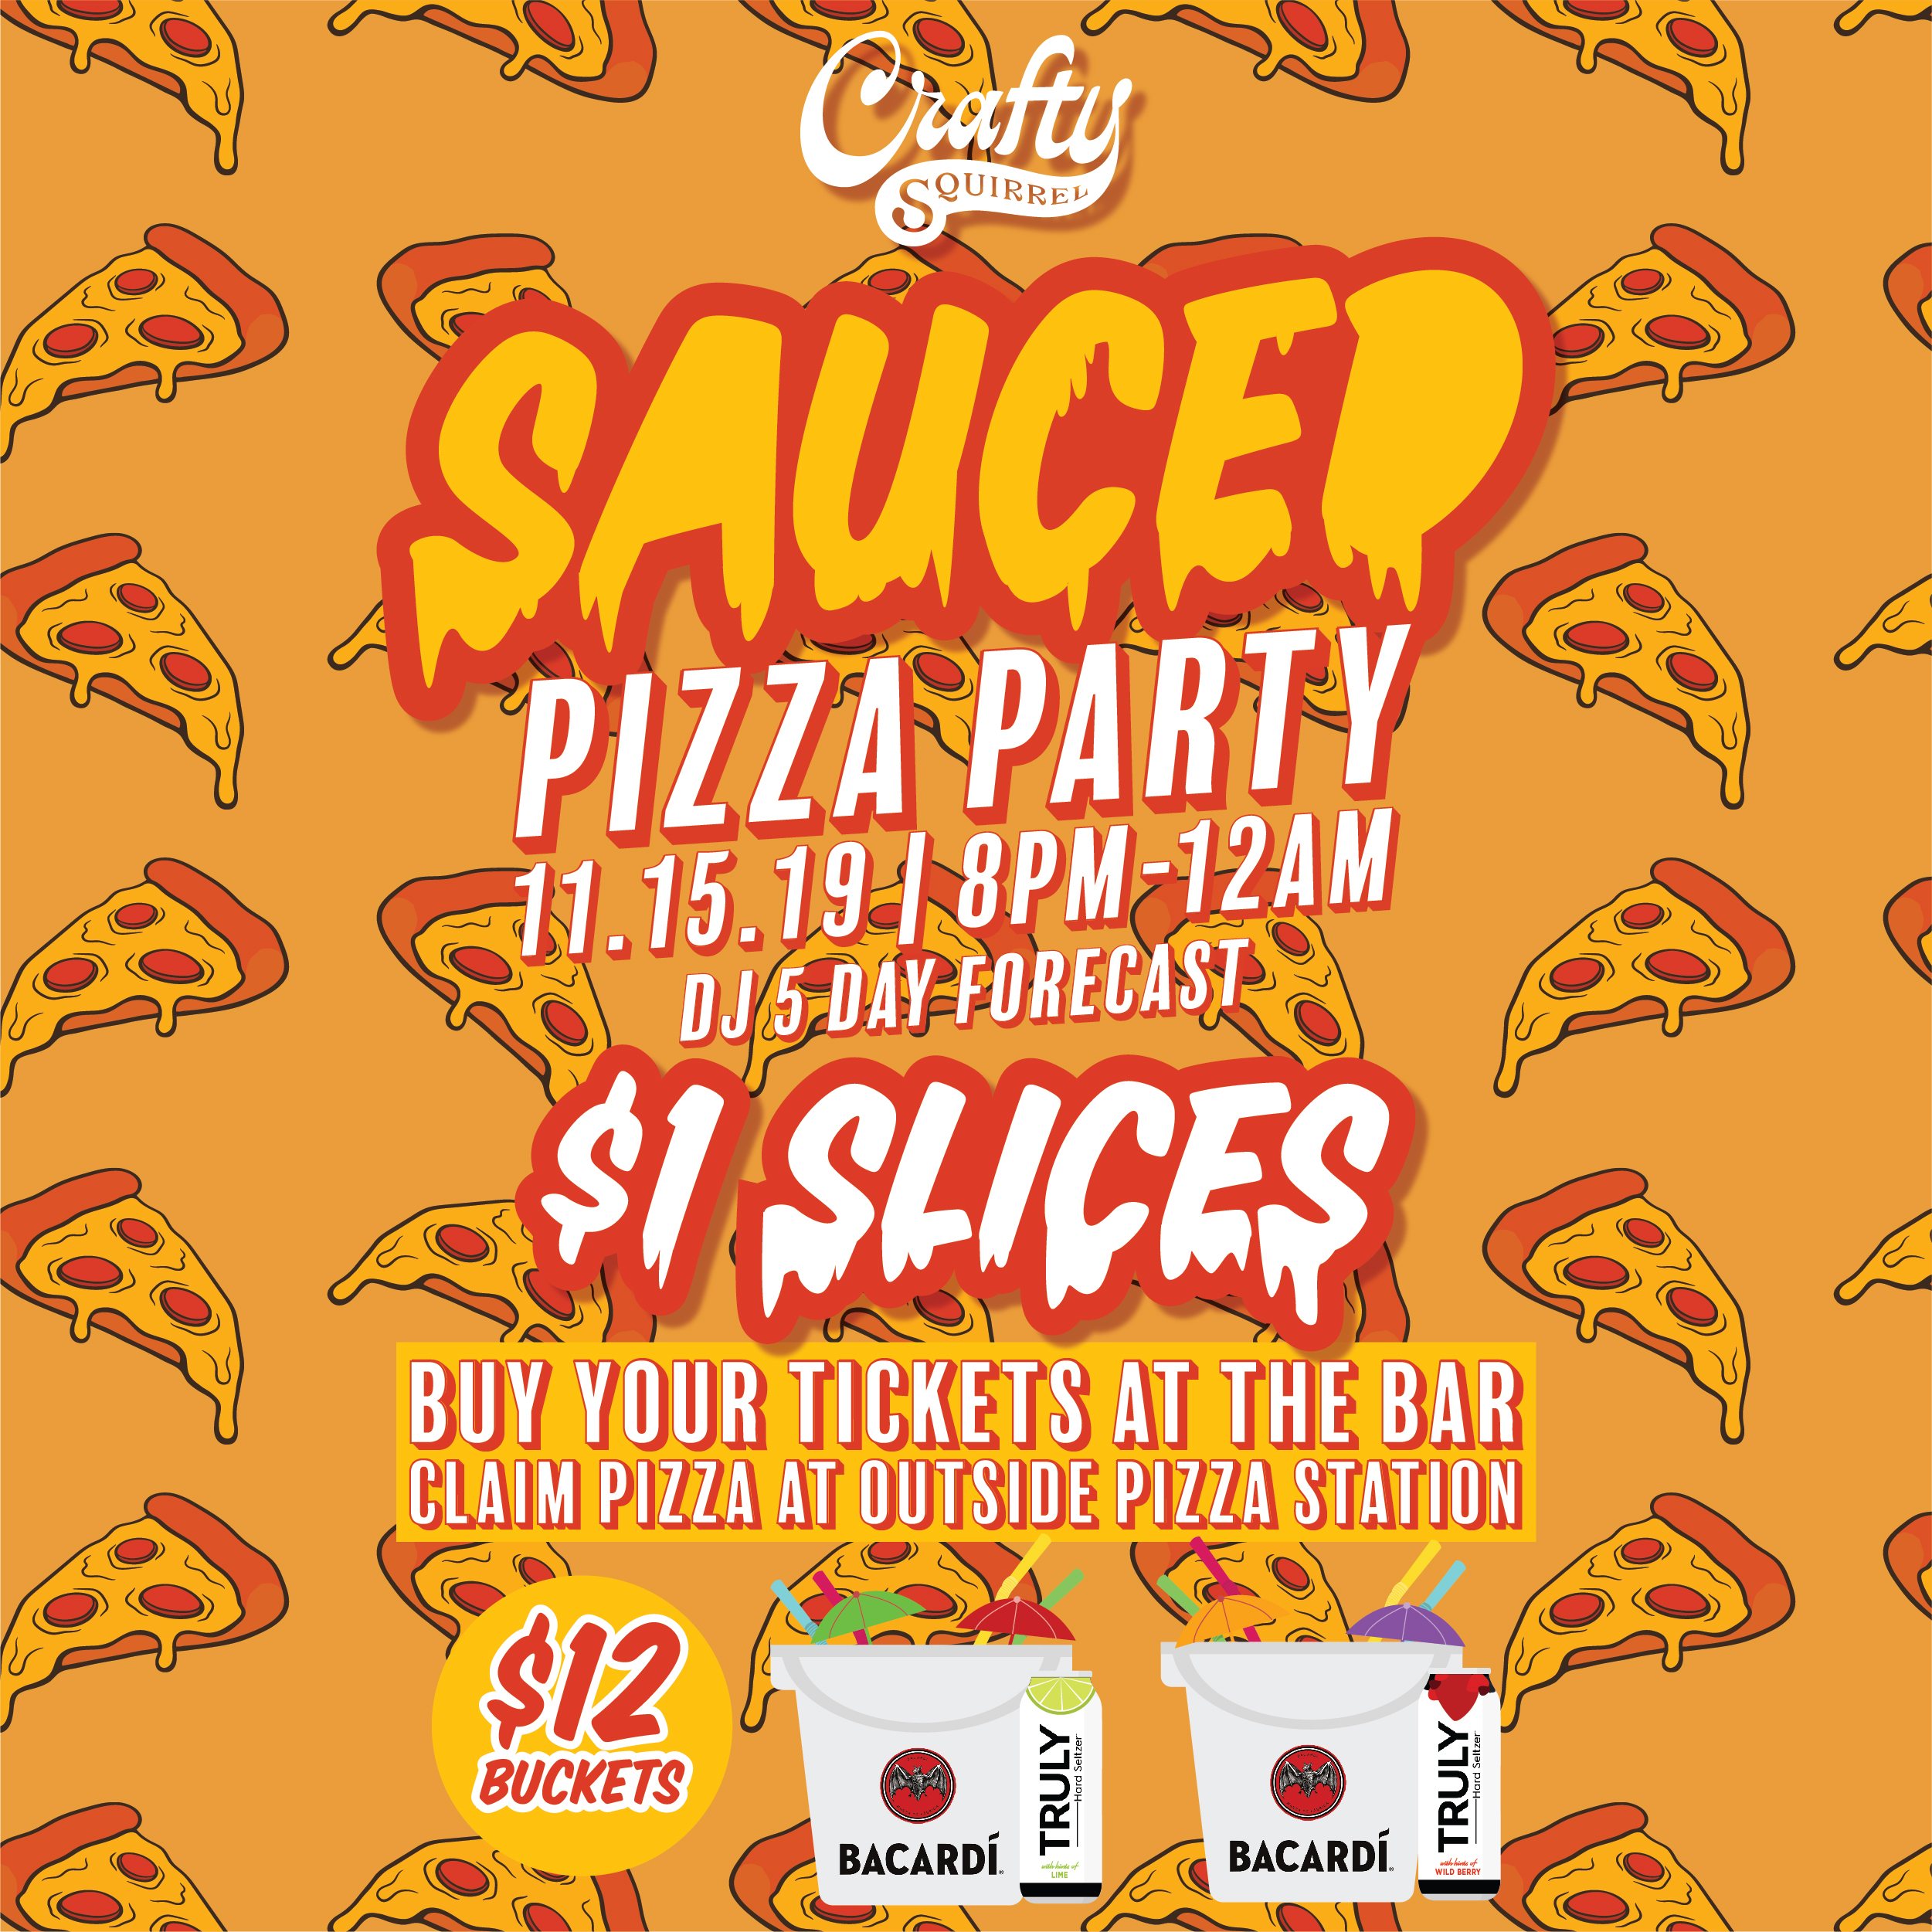 The Crafty Squirrel Hosts “Sauced”, $1 Slices of Artisan Pizza